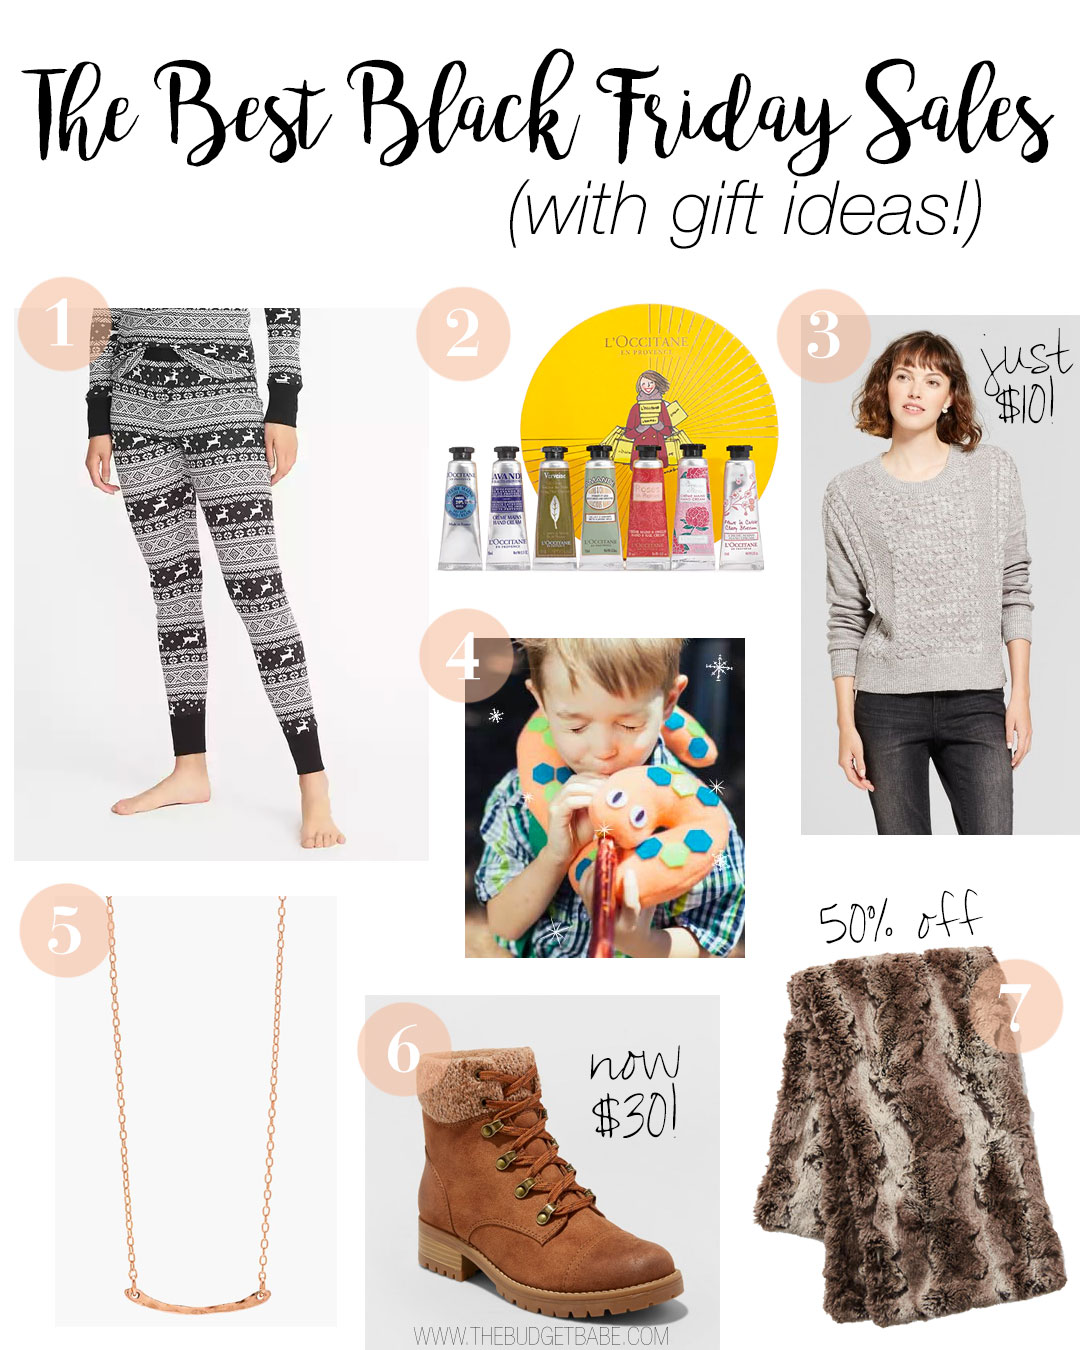 The Best Black Friday Sales With Gift Ideas!